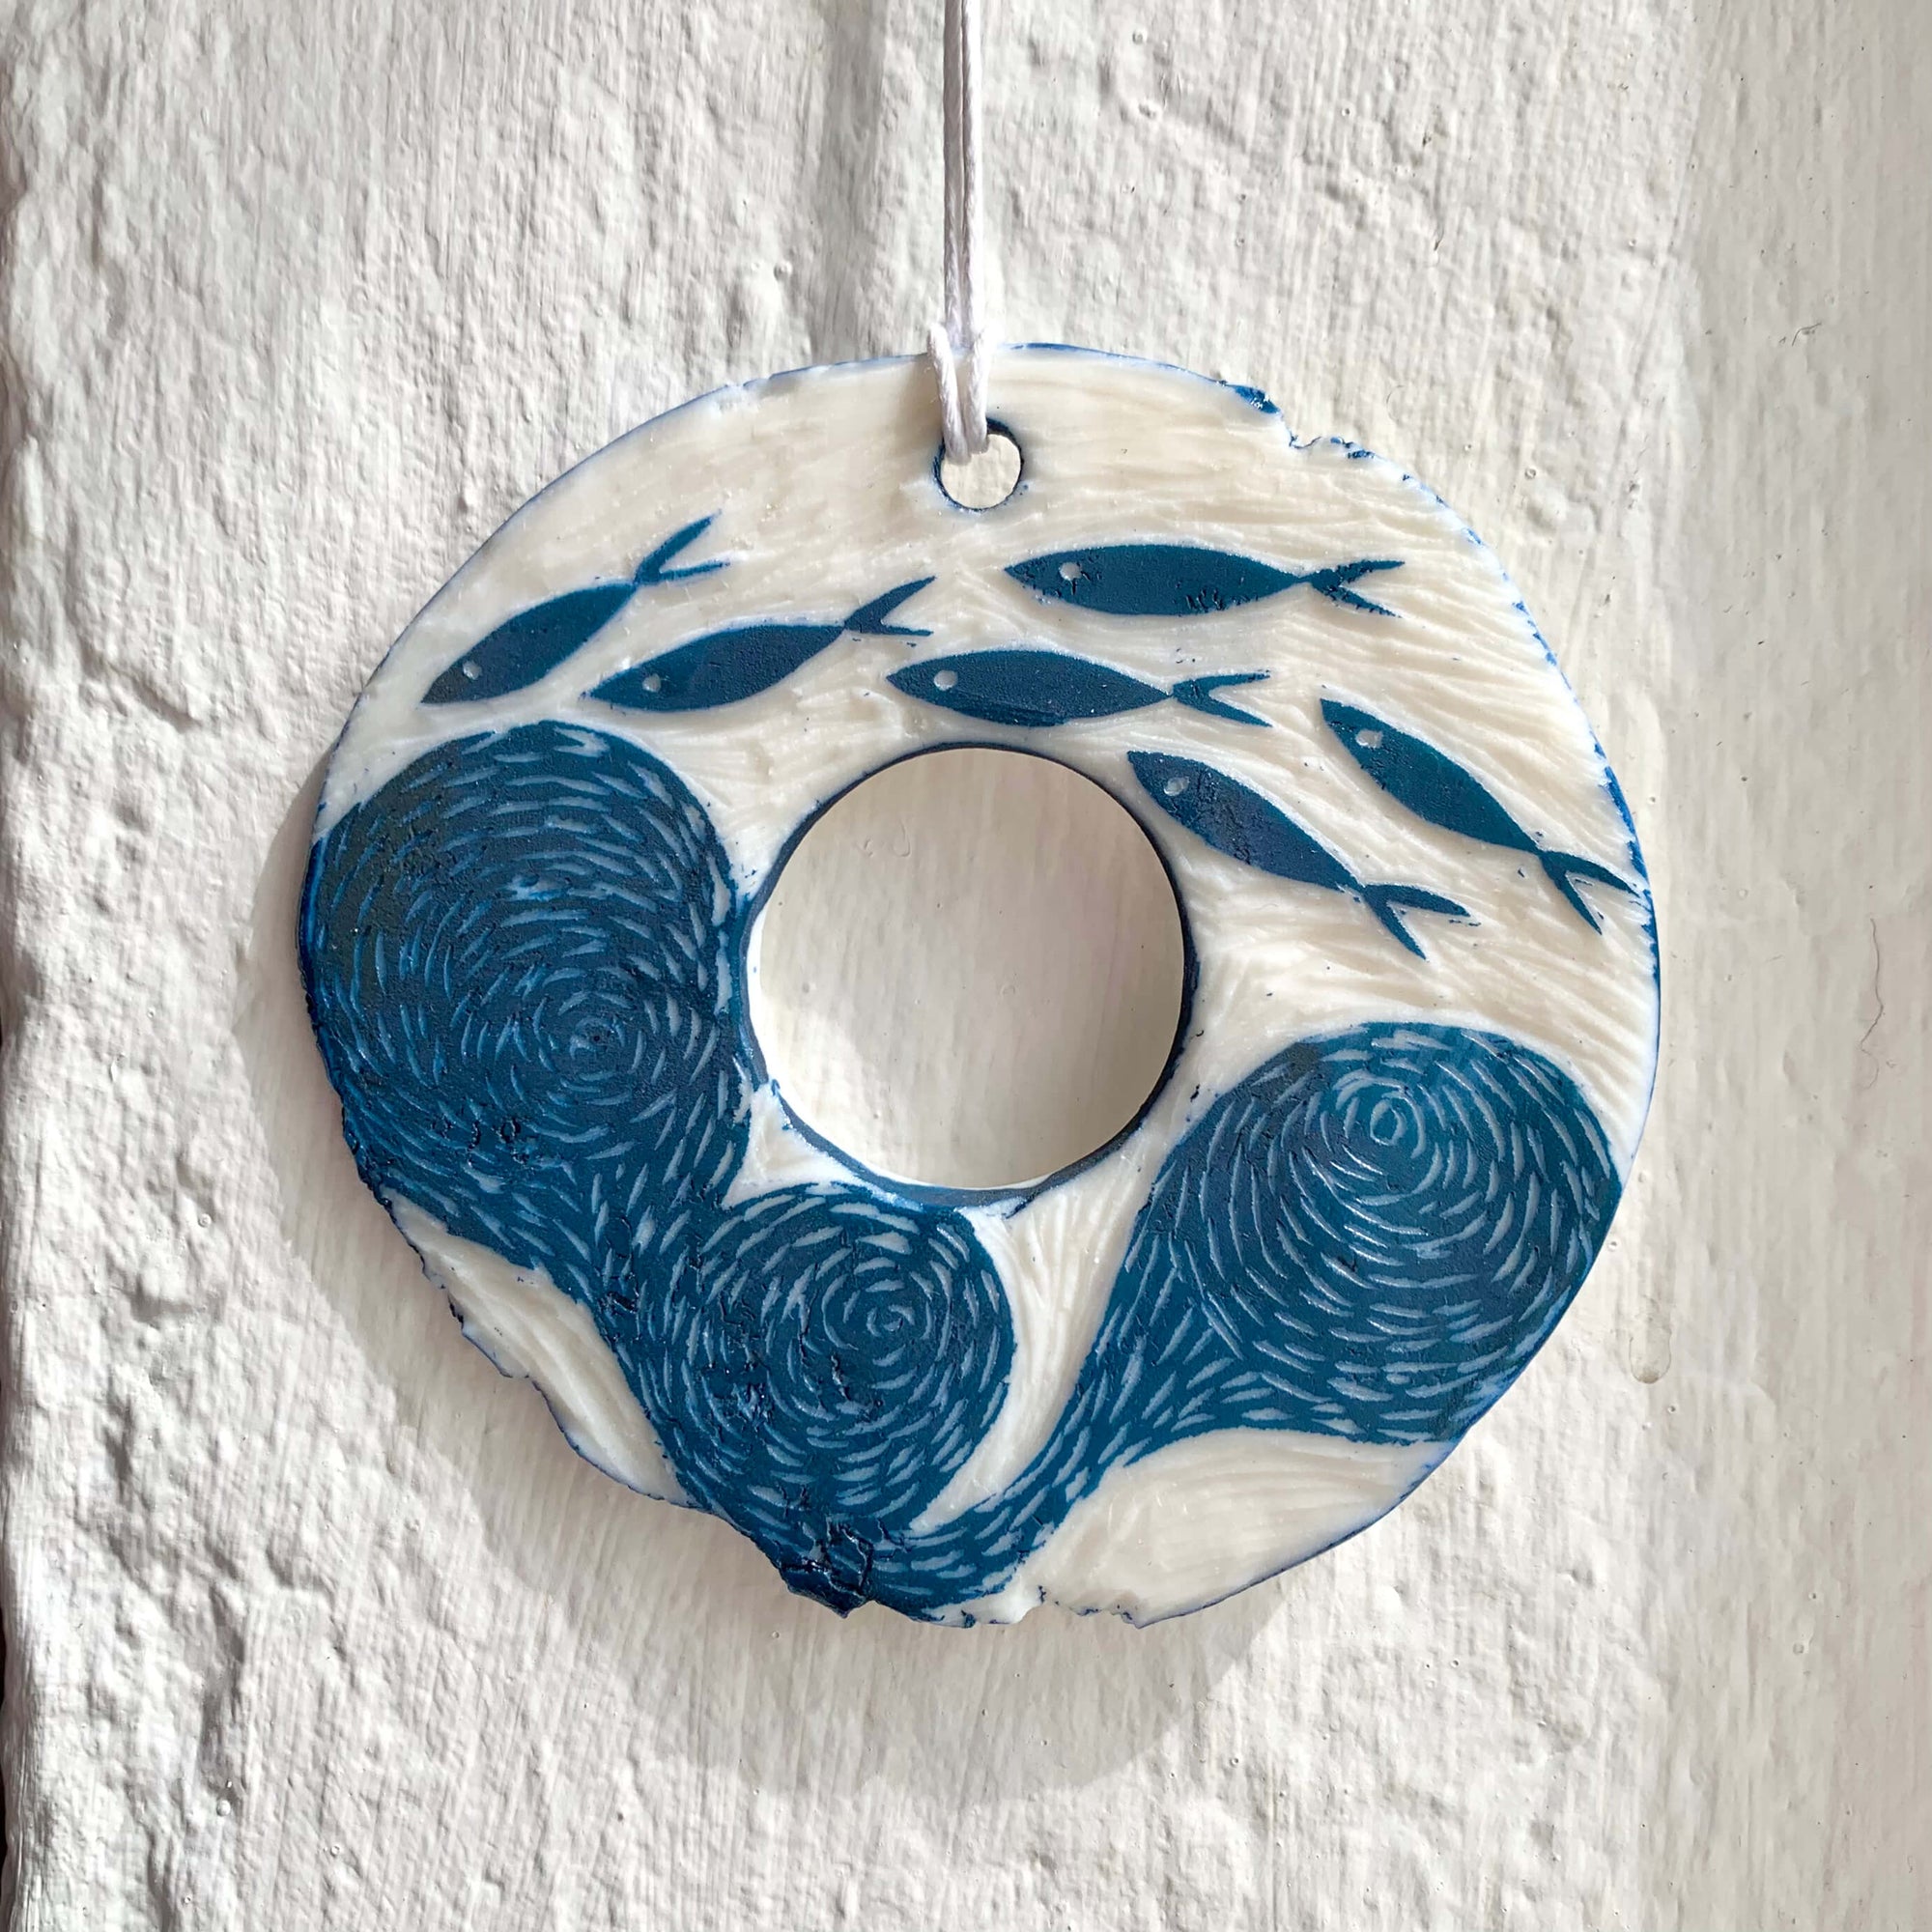 Handcrafted by Sarah Livingstone. White and blue porcelain rough circular shaped hanging, with a hole in the middle and swirly waves and fishes carved into it.